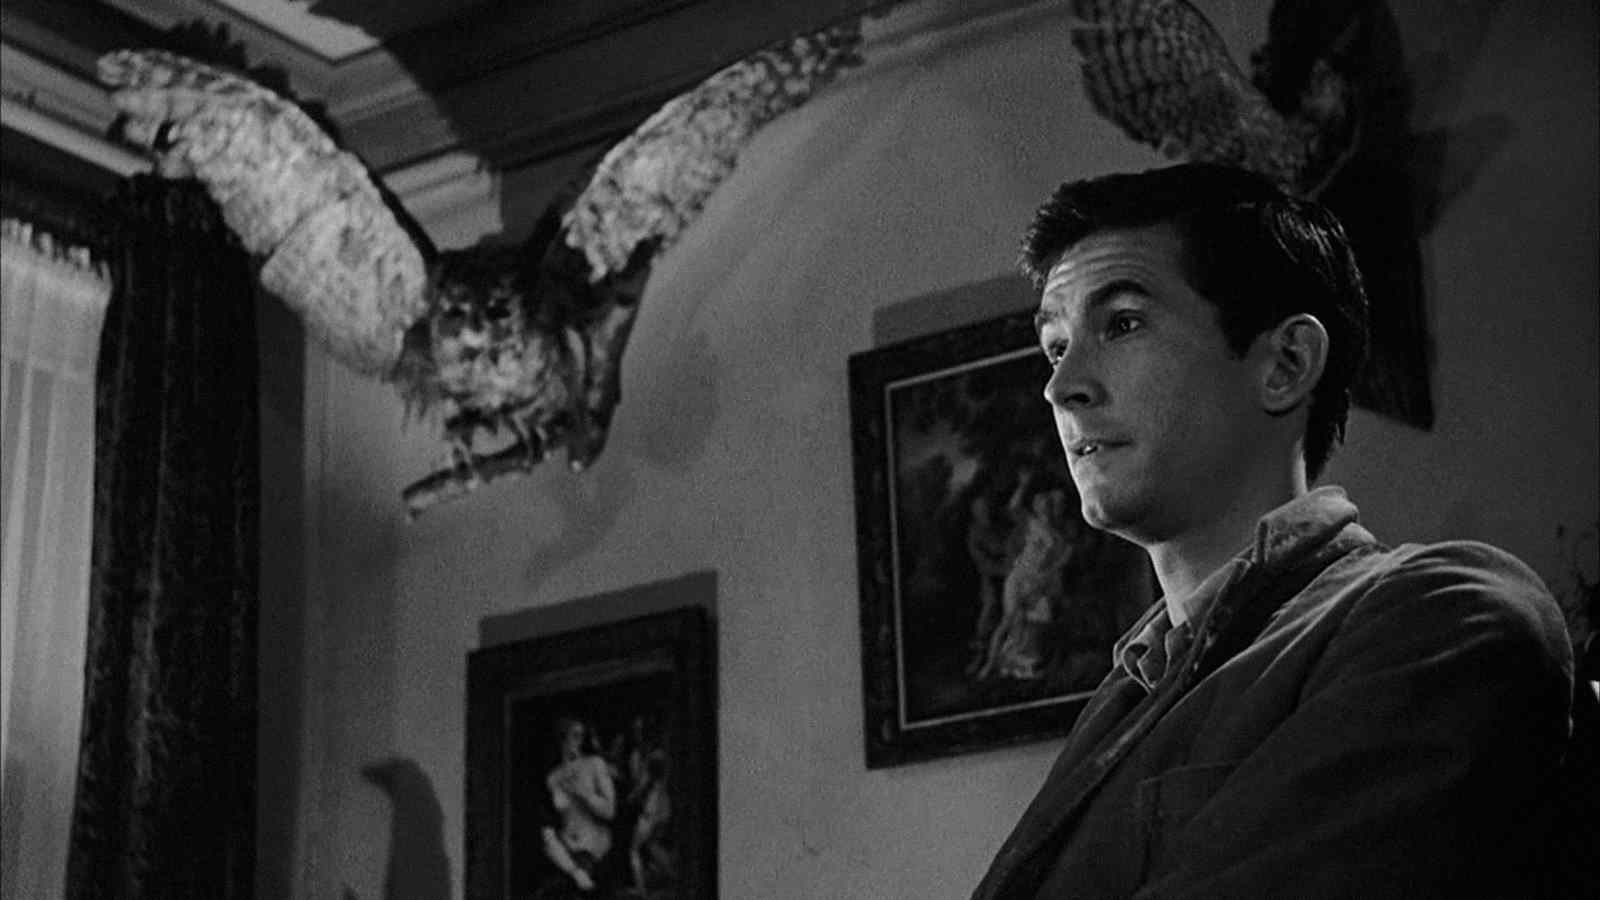 Norman Bates (Anthony Perkins) in Alfred Hitchcock's Psycho.